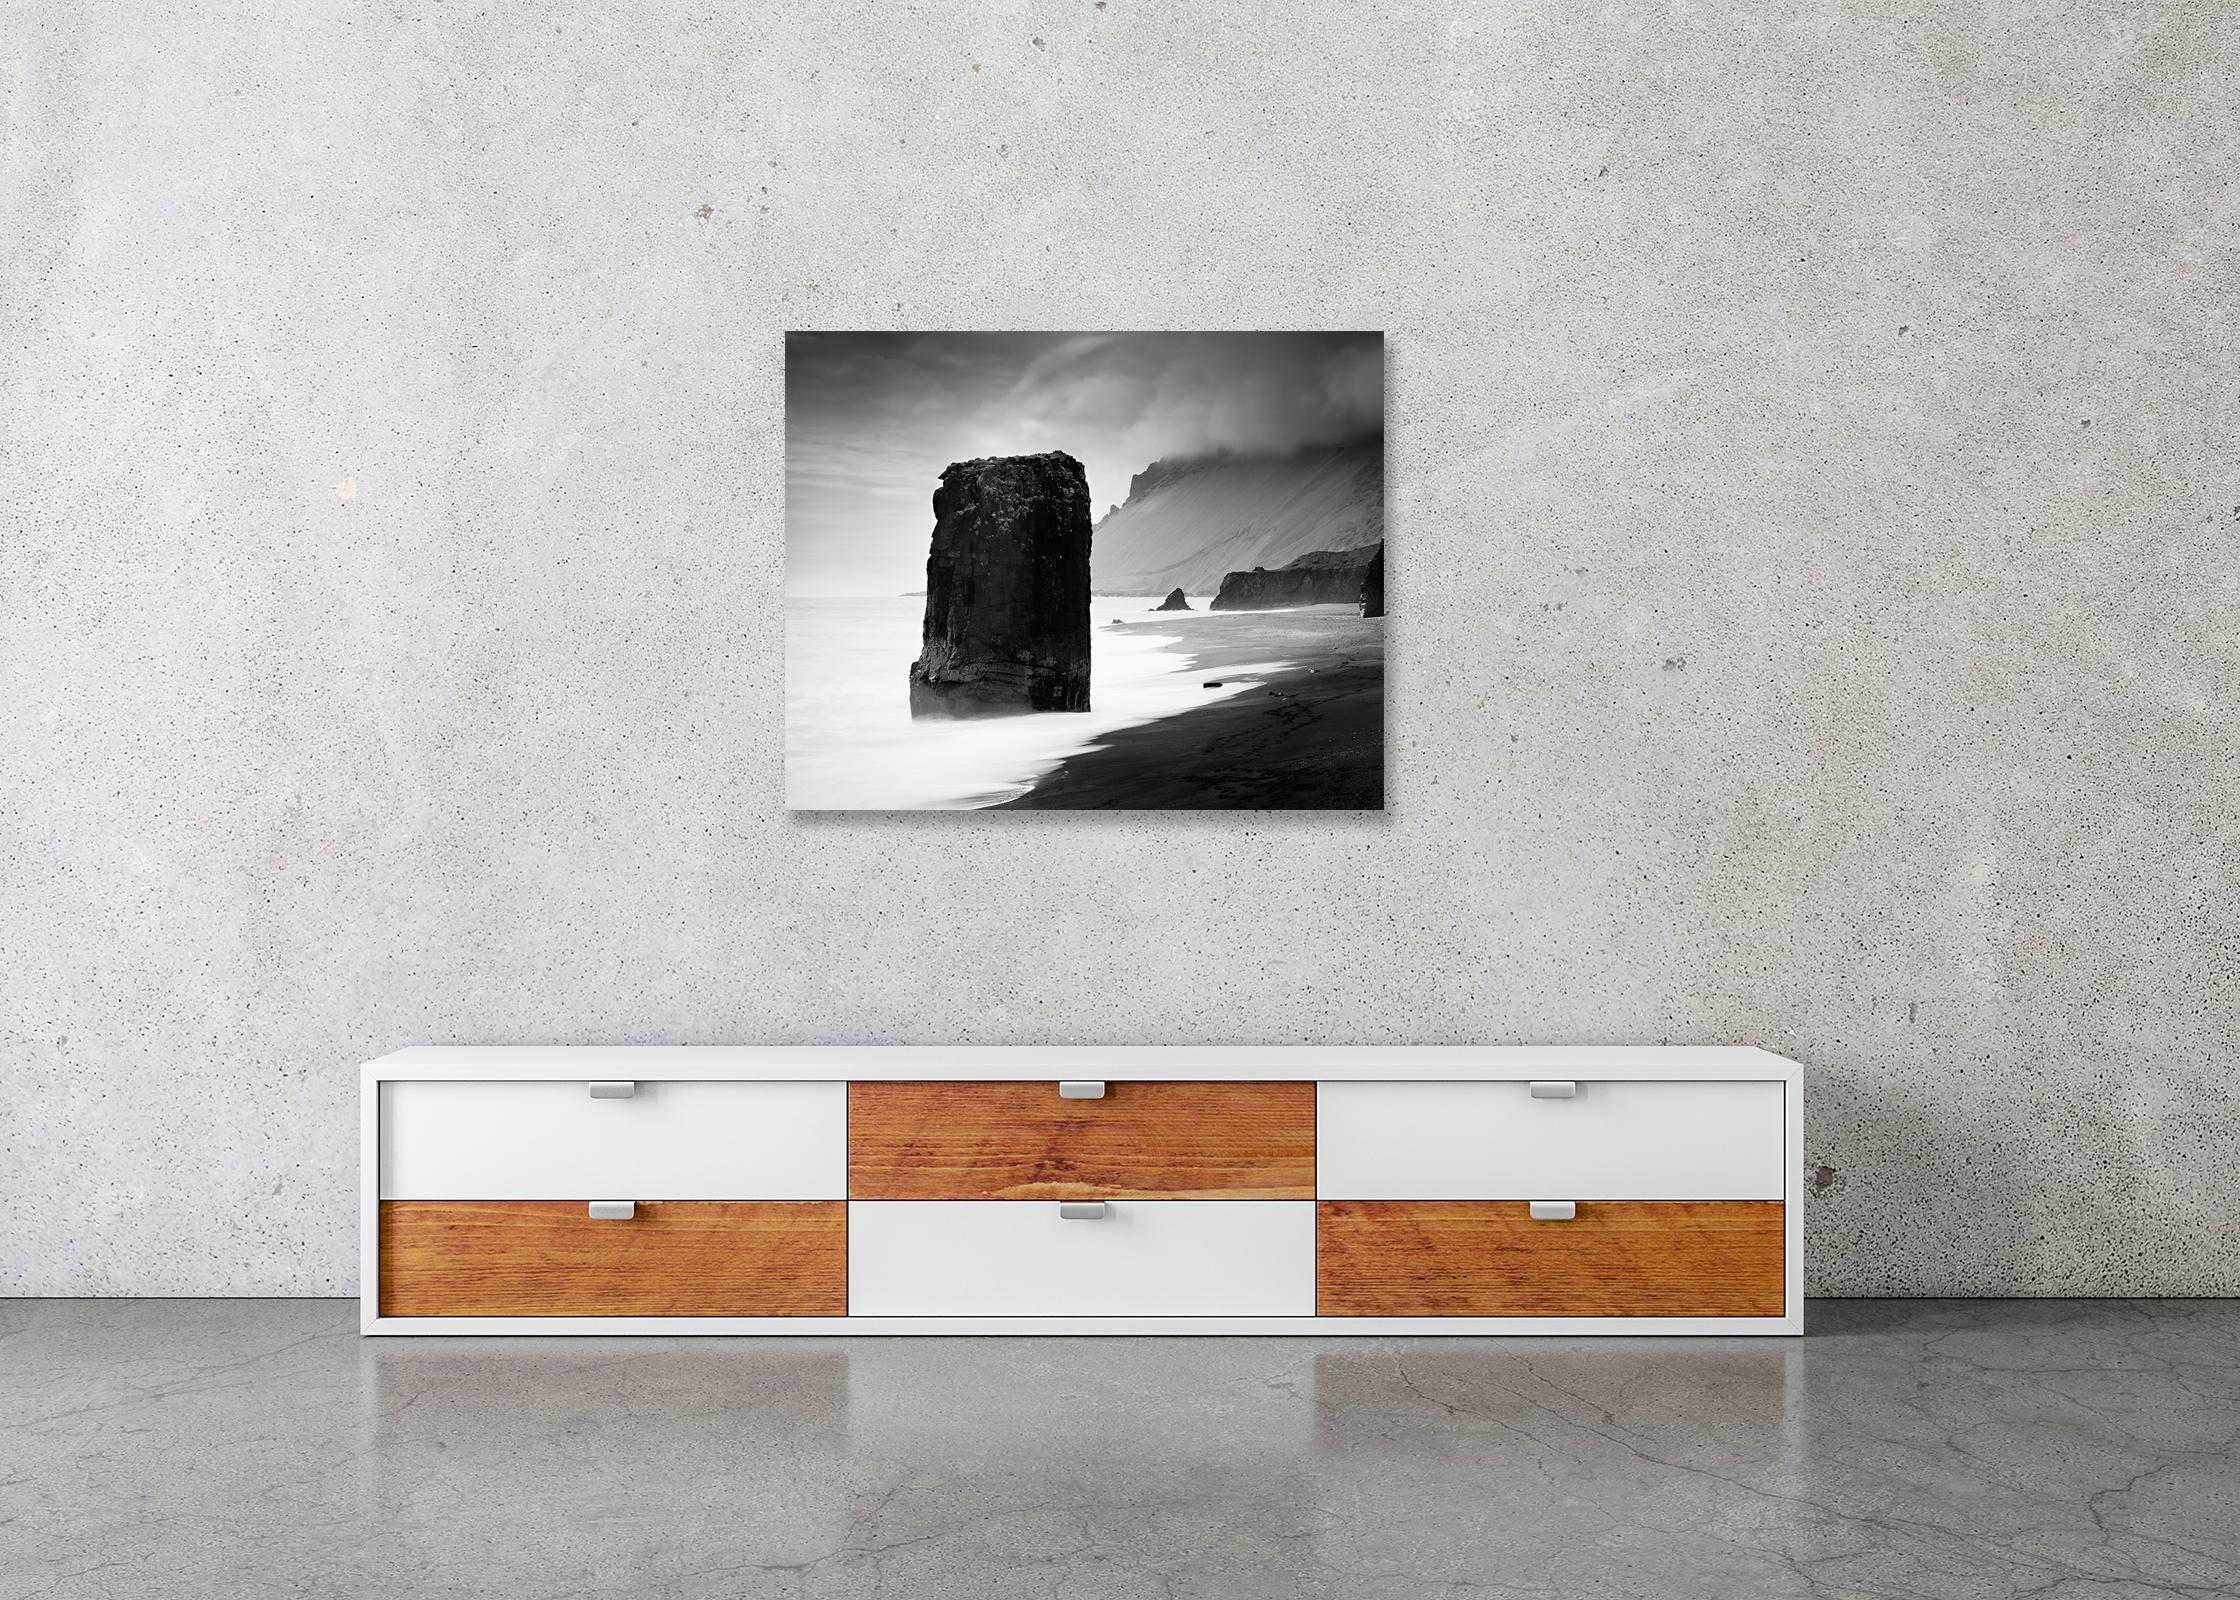 Black and white fine art long exposure waterscape - landscape photography. Archival pigment ink print as part of a limited edition of 15. All Gerald Berghammer prints are made to order in limited editions on Hahnemuehle Photo Rag Baryta. Each print